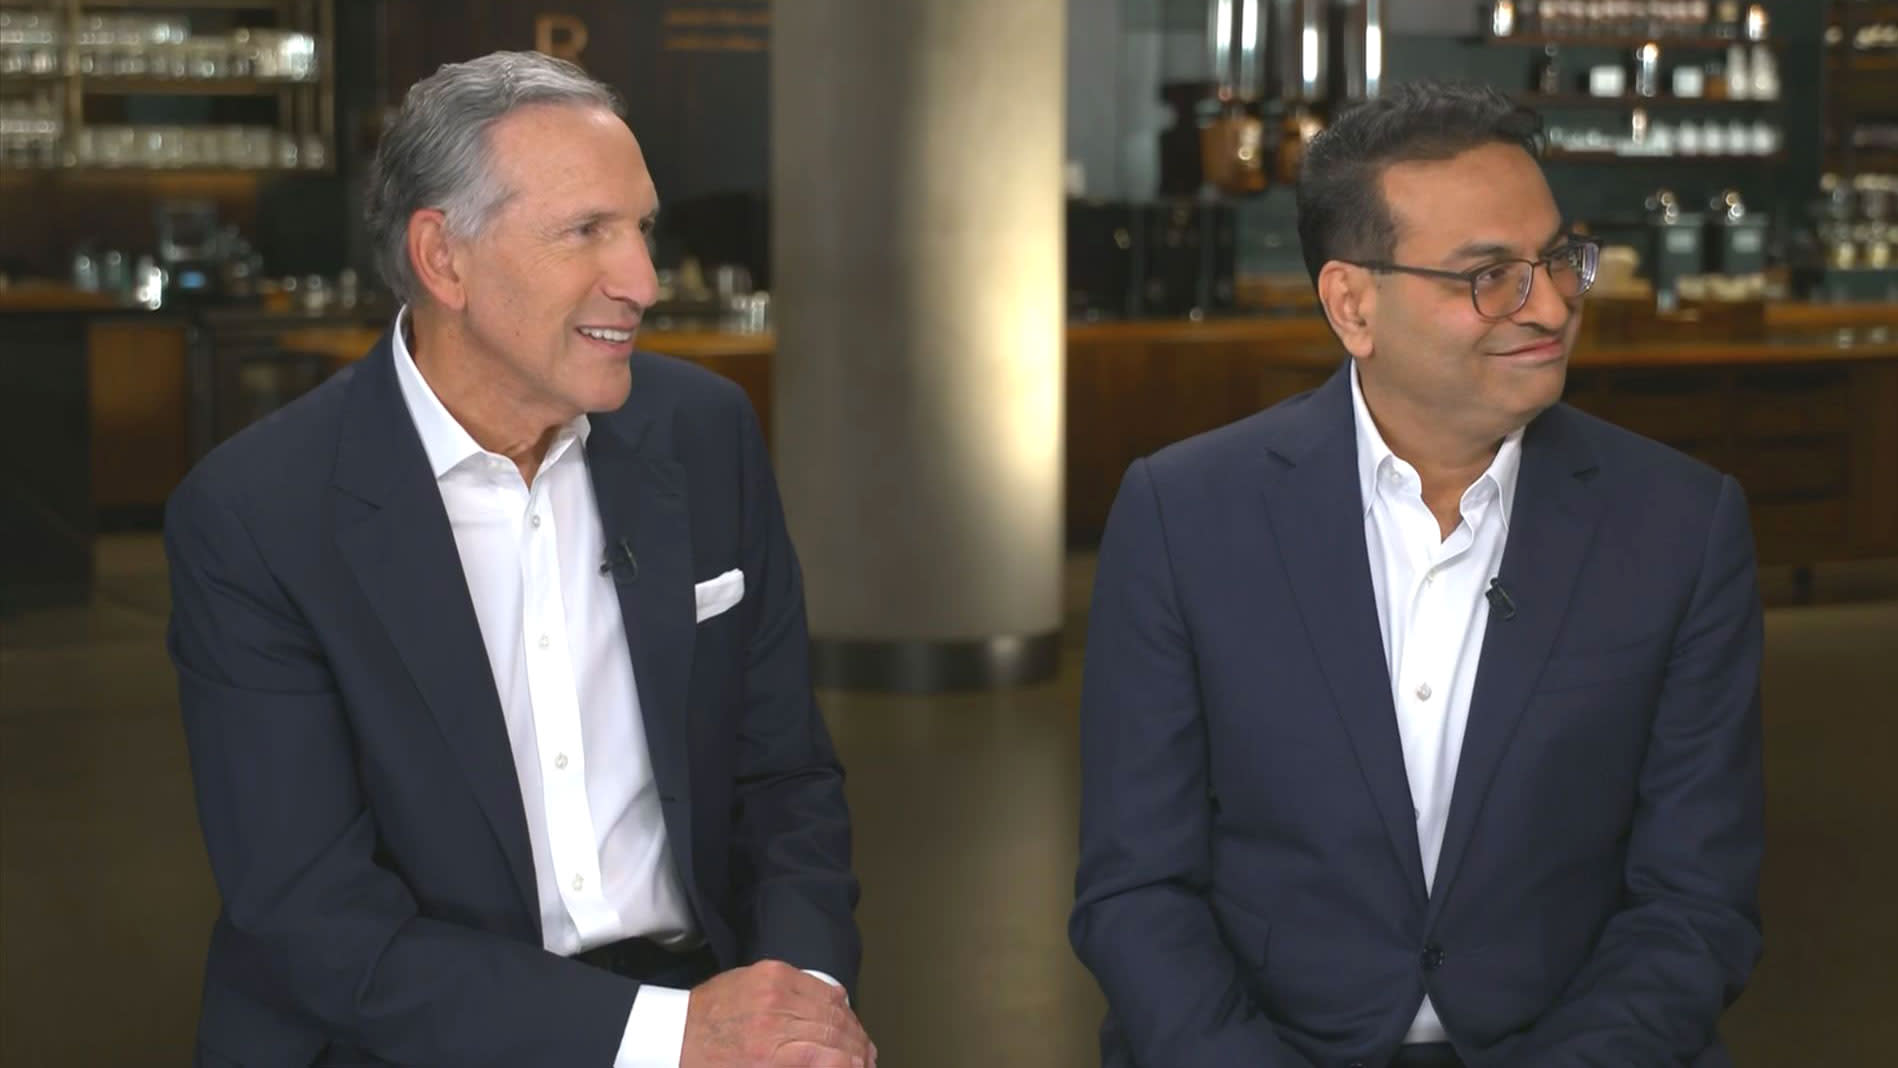 We like the vision Howard Schultz and Starbucks incoming CEO Laxman Narasimhan laid out for the coffee giant